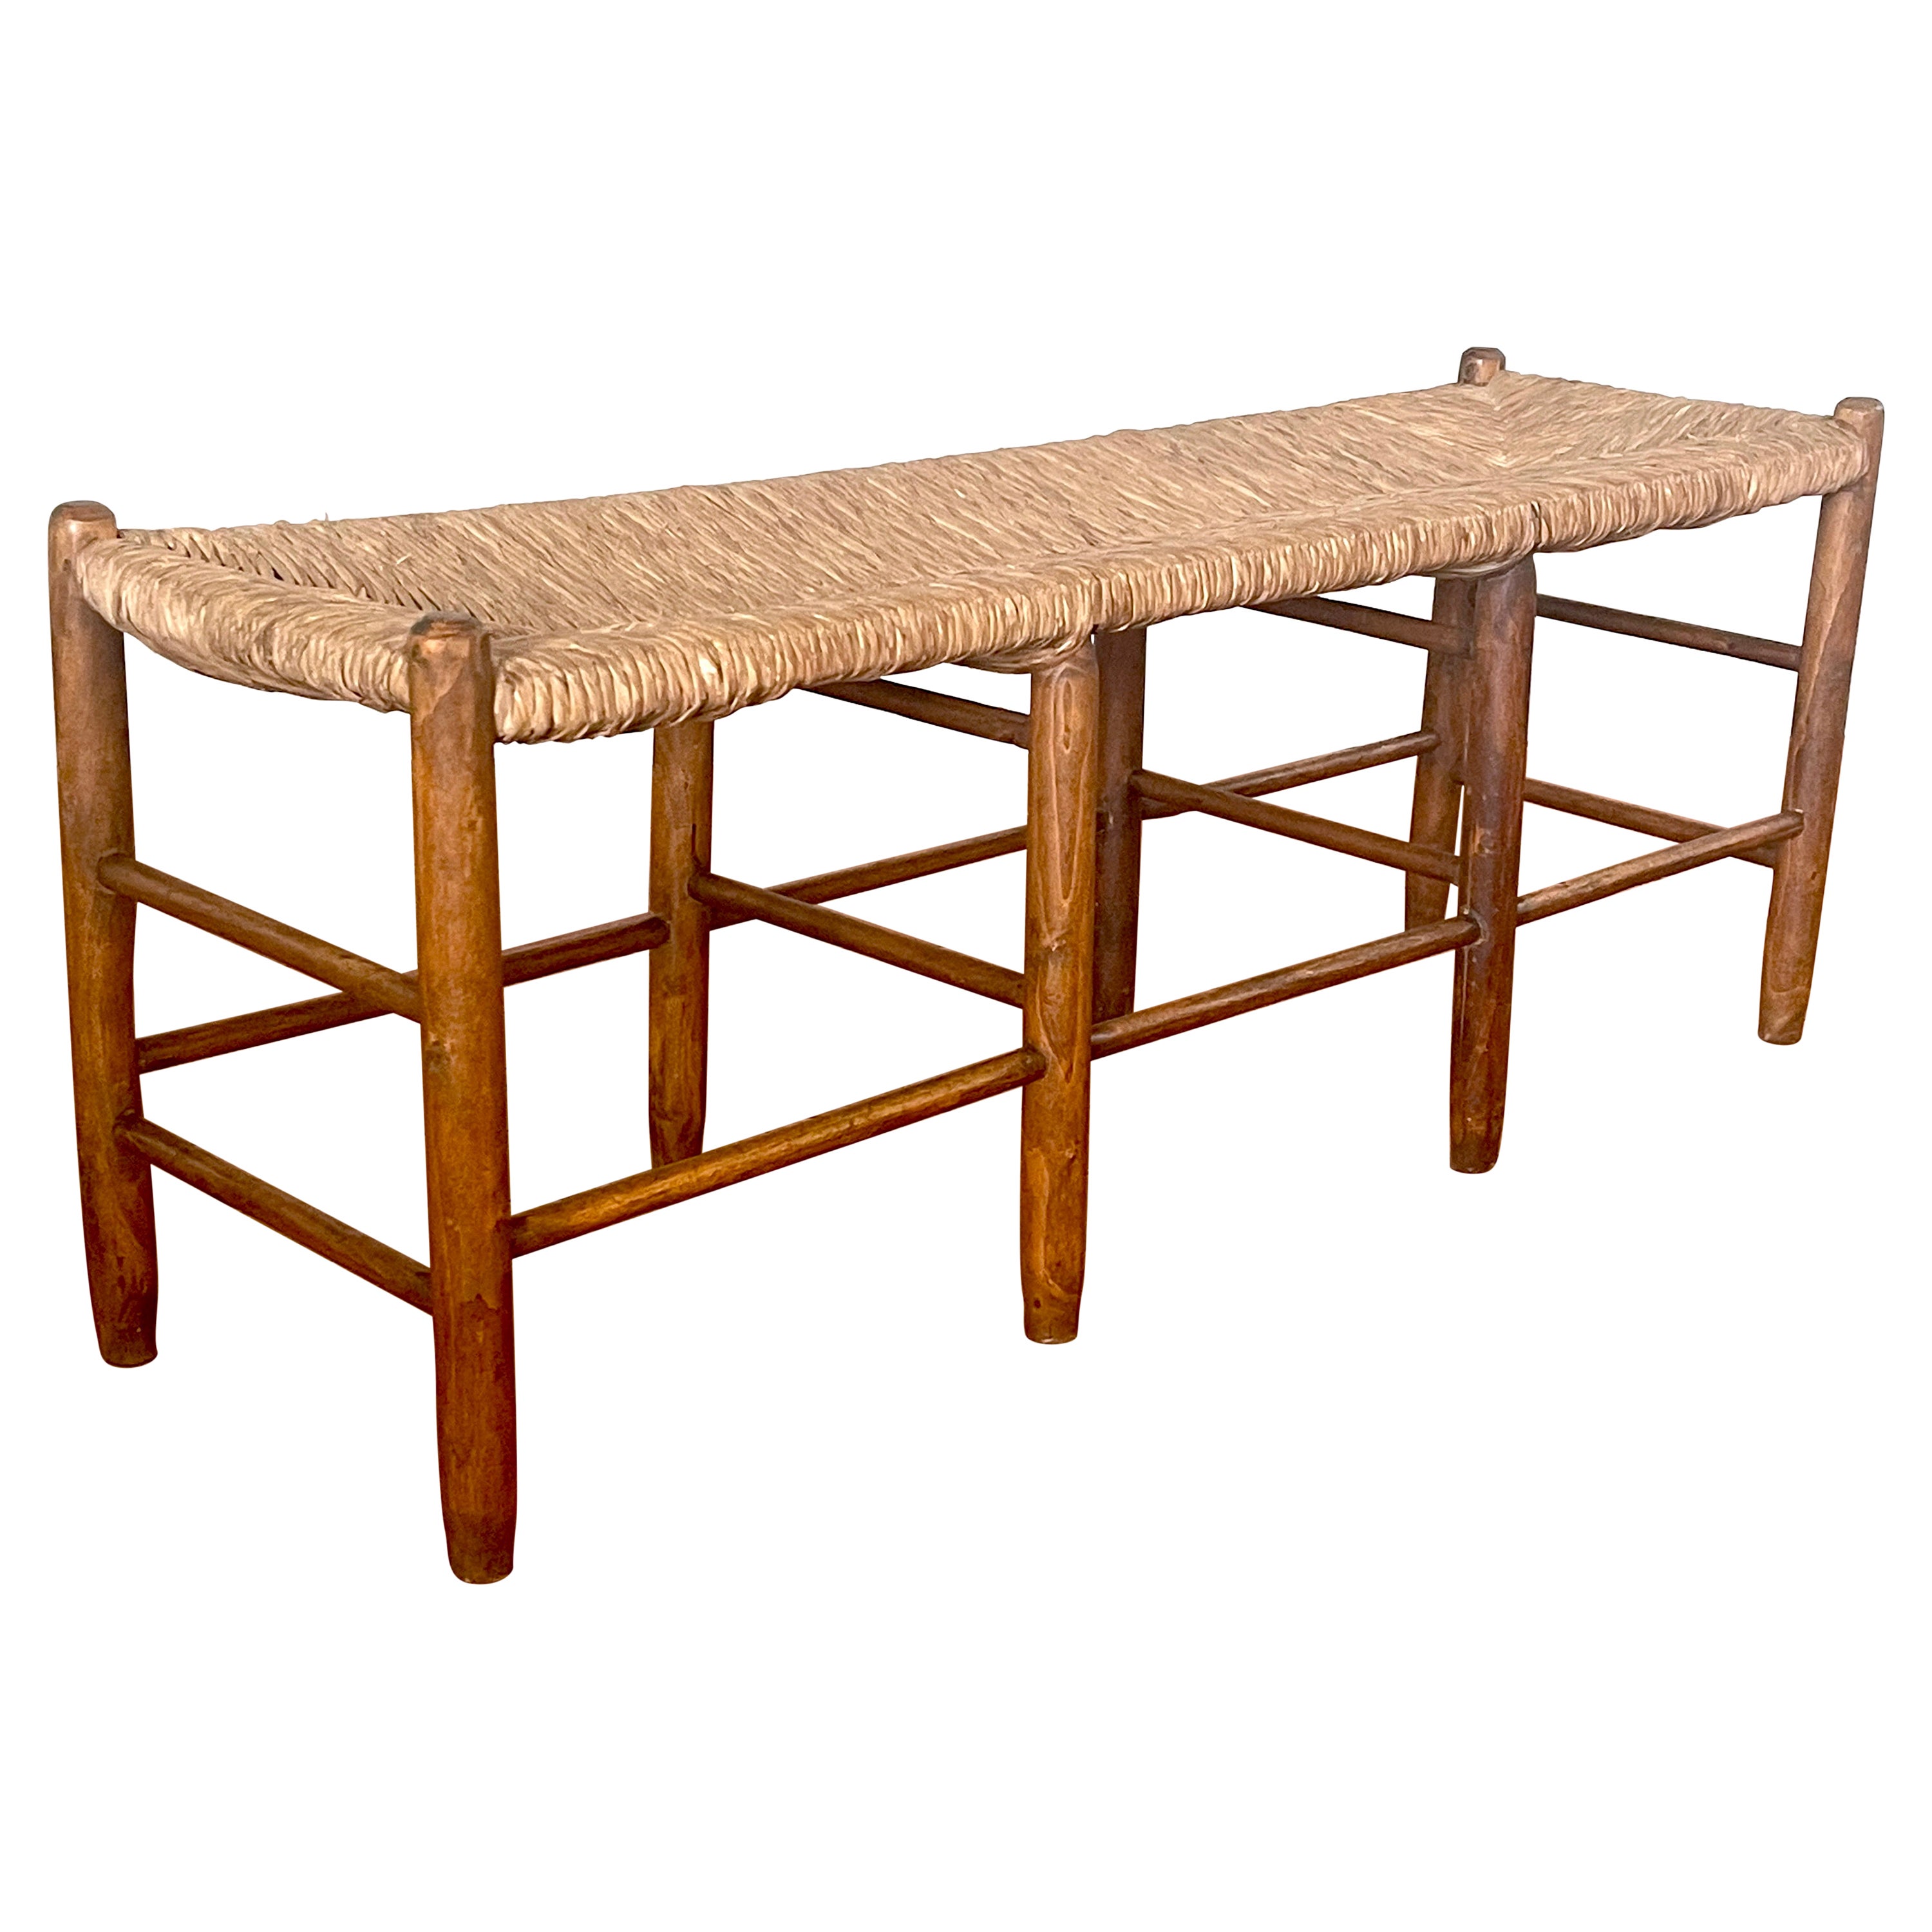 Perriand Style Bench